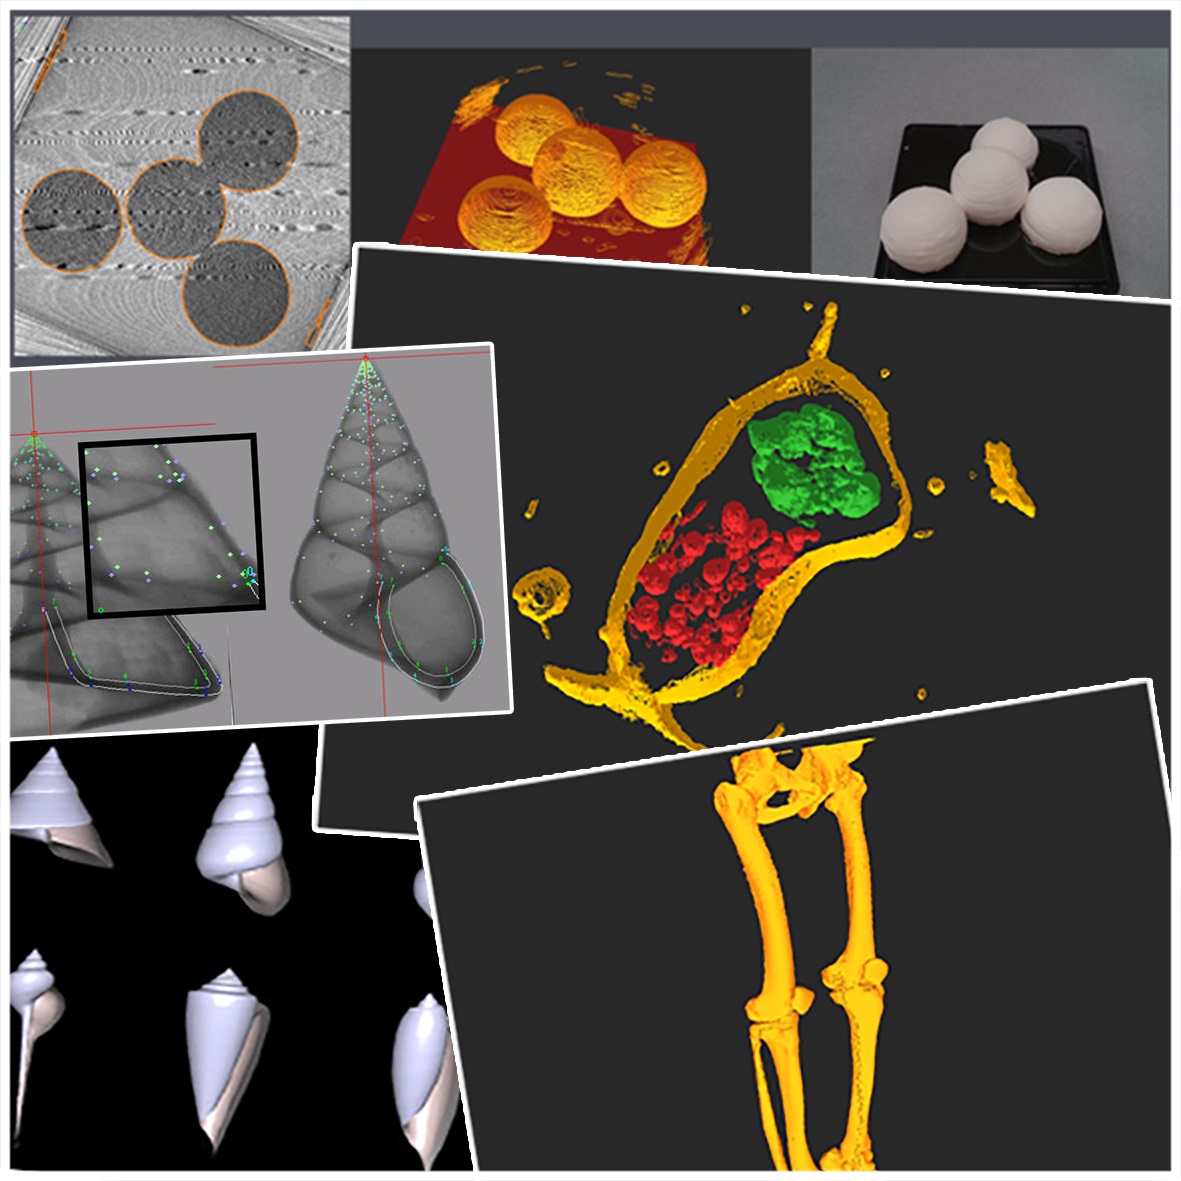 Examples of (semi-) automatic contour extraction of the objects from microscopy 2D images with image processing or numerical methods, and 3D visualization with obtained indices.